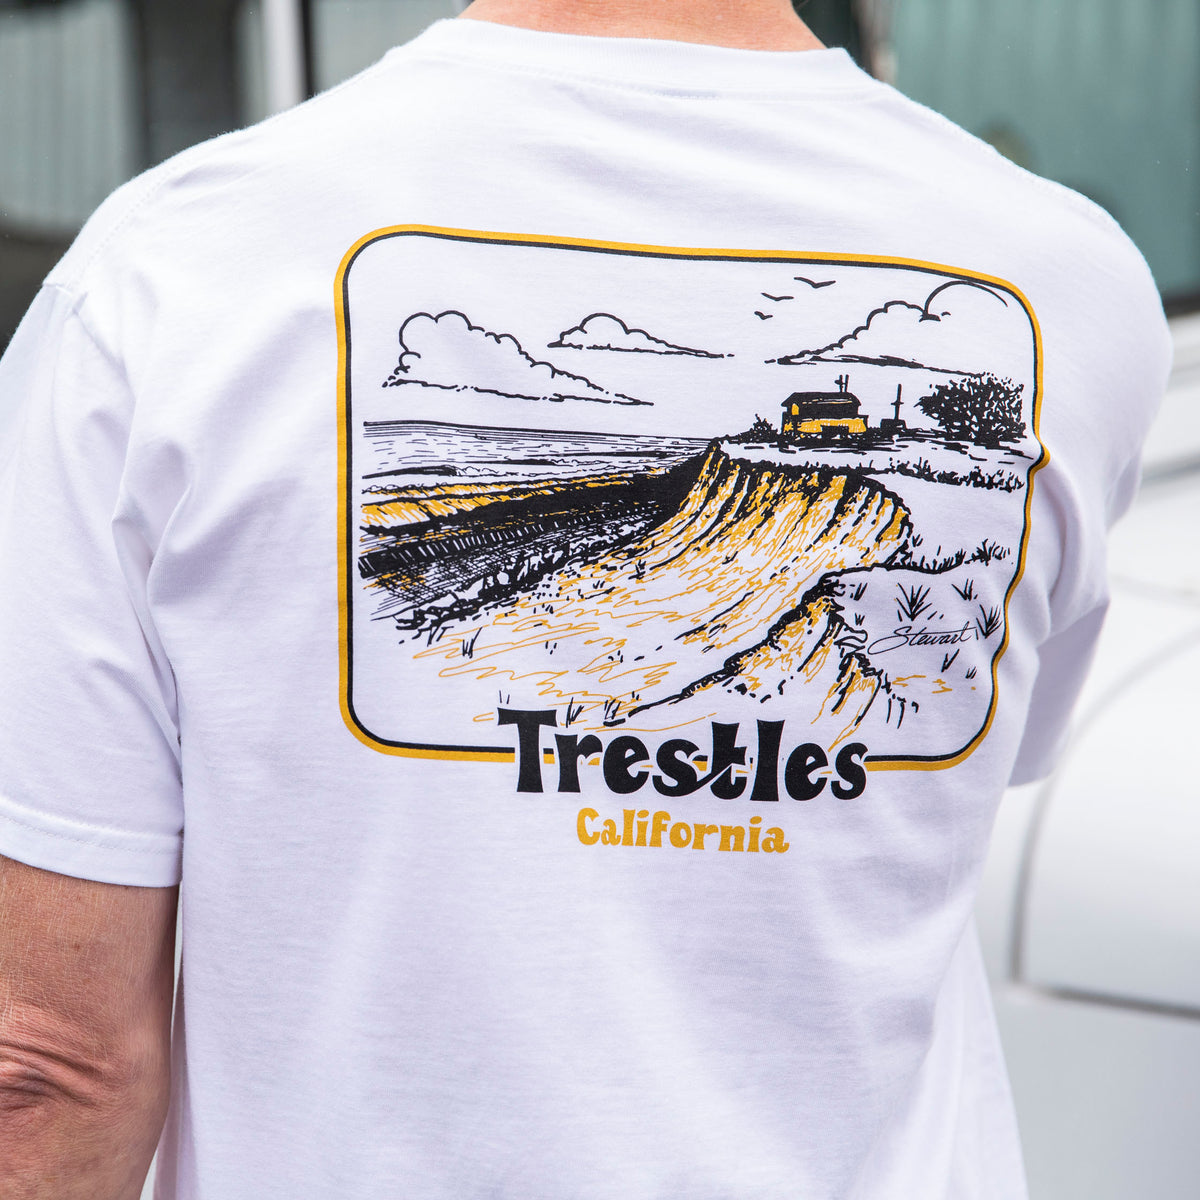 Surfer wearing the Stewart Trestles t-shirt in white, back view of shirt